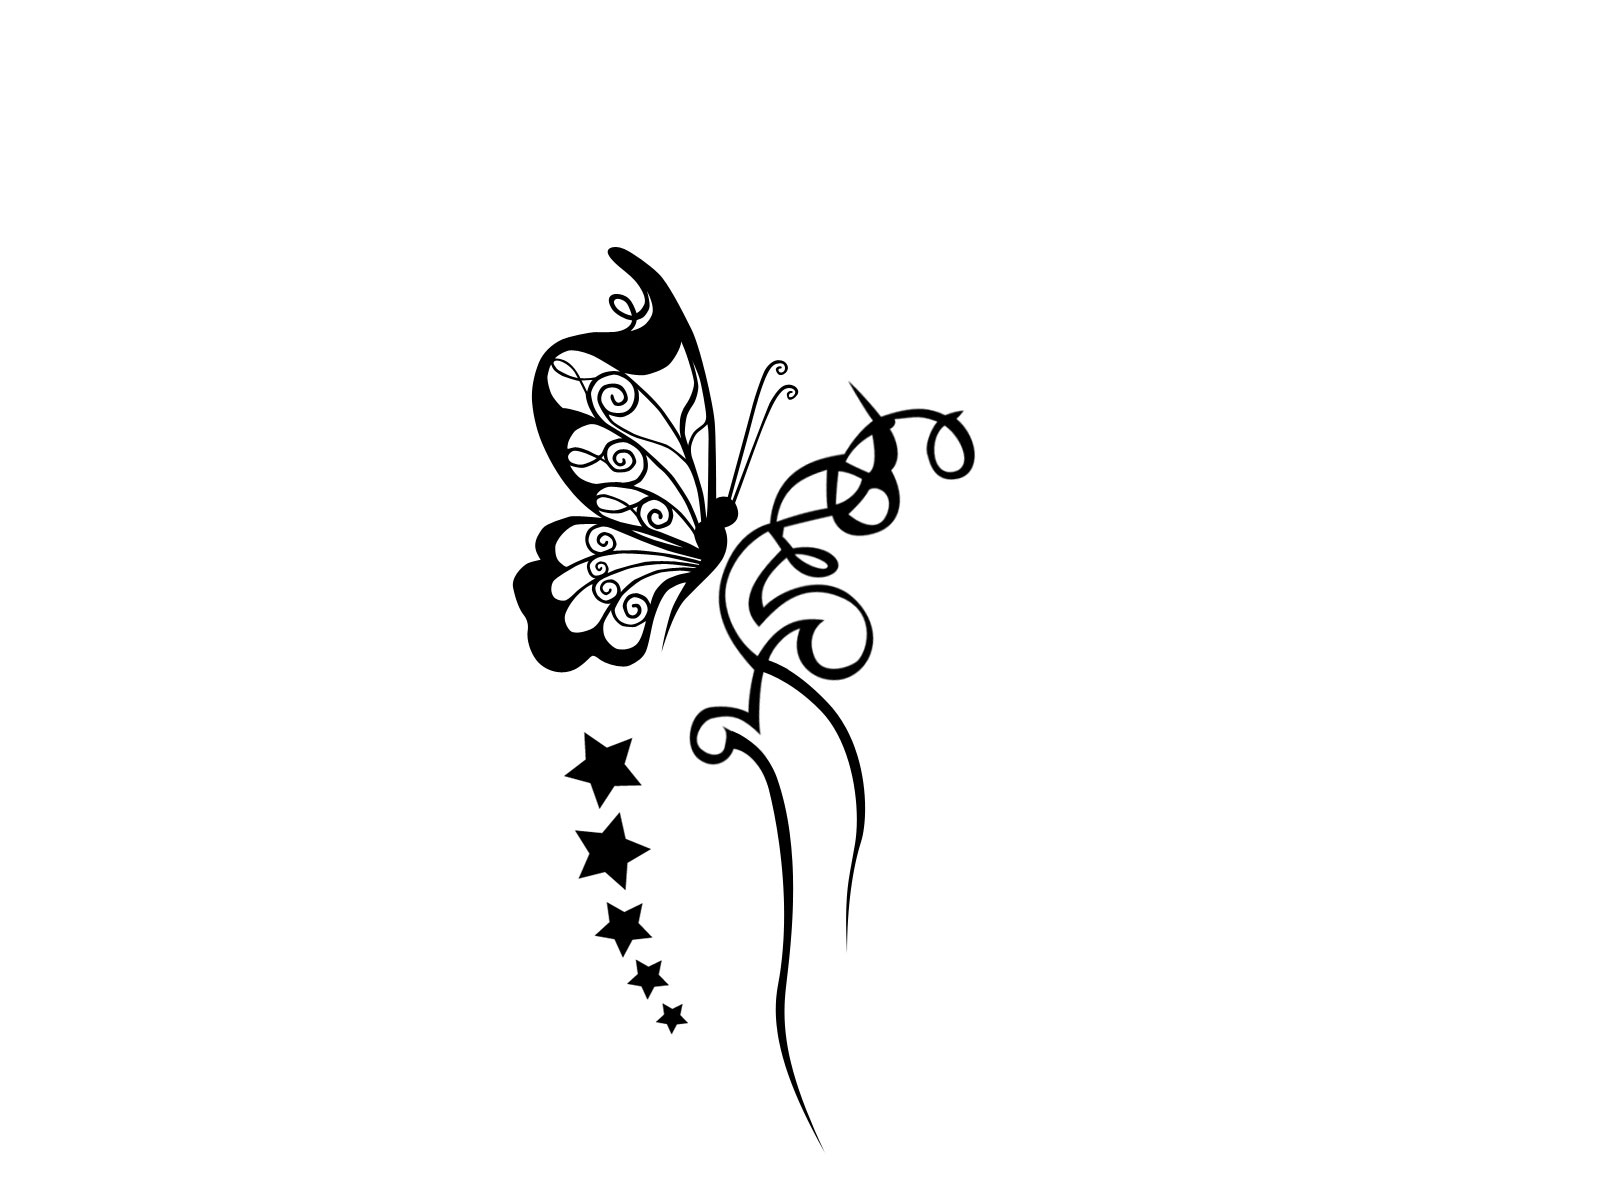 Black And White Butterfly Tattoos Designs Tattoos Designs Ideas in sizing 1600 X 1200